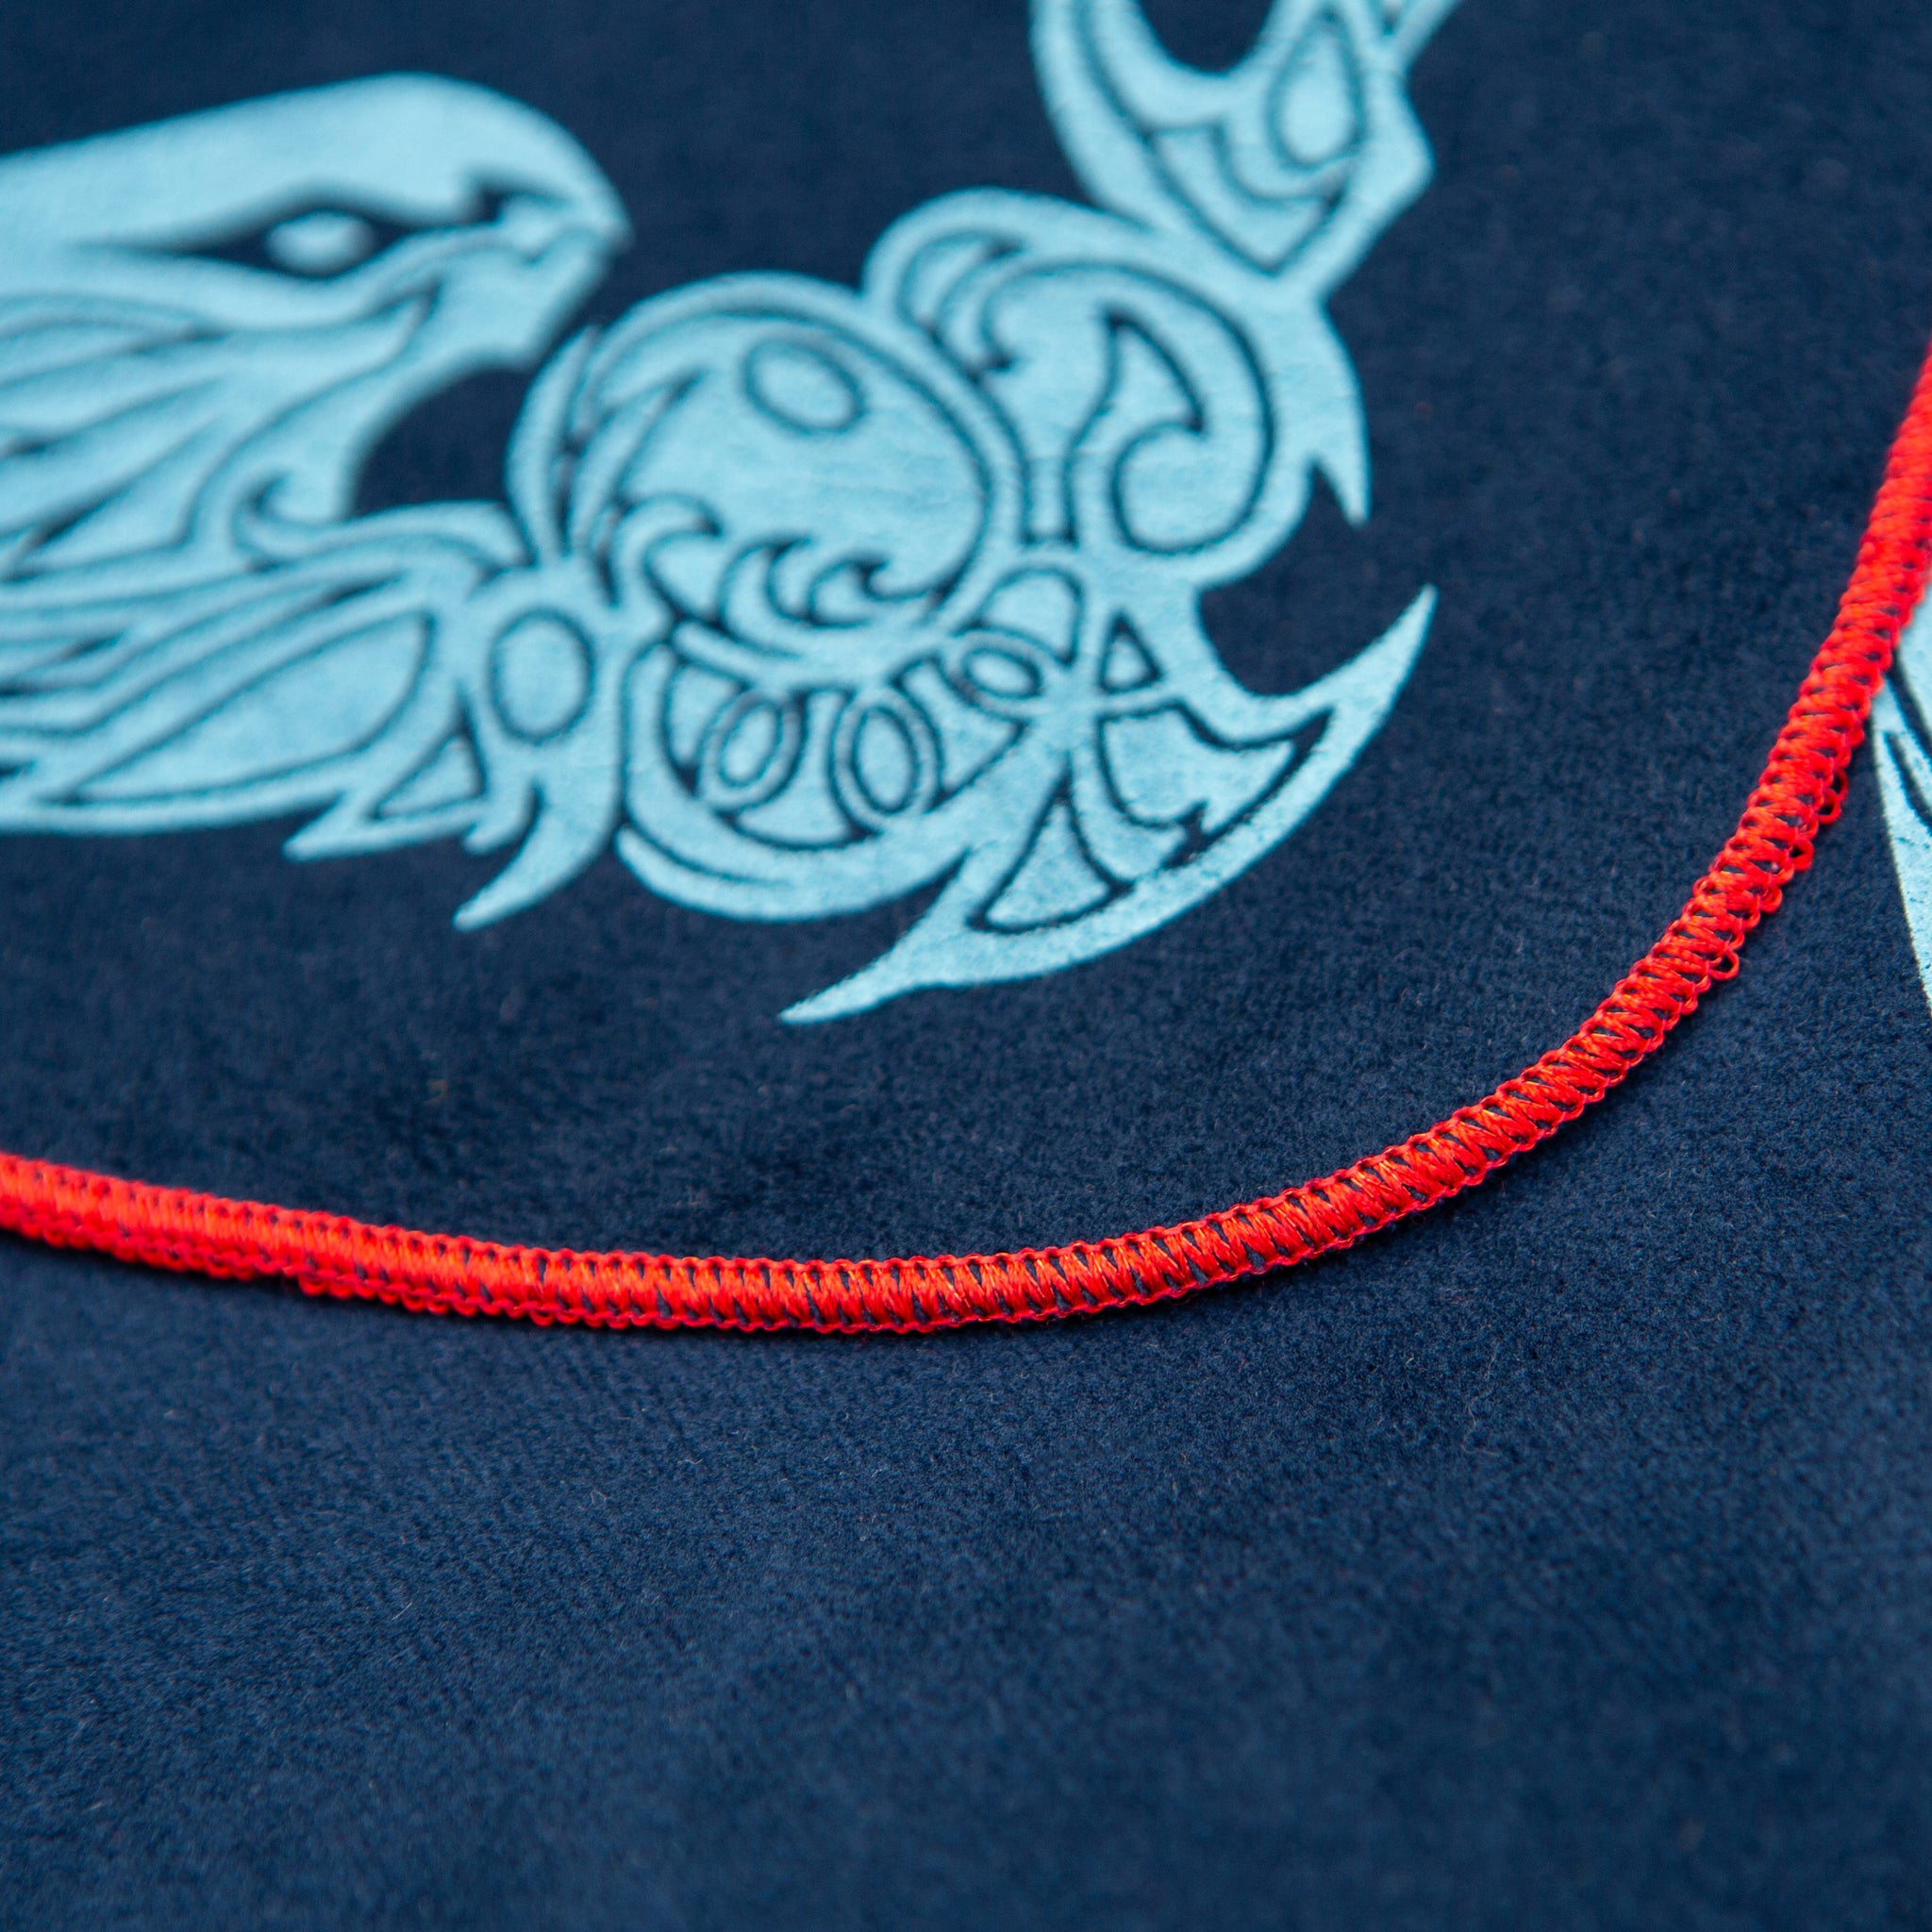 The Dragon's Maiden | PROTOTYPE | Fibreglide Navy x Light Blue *Red Stitched*